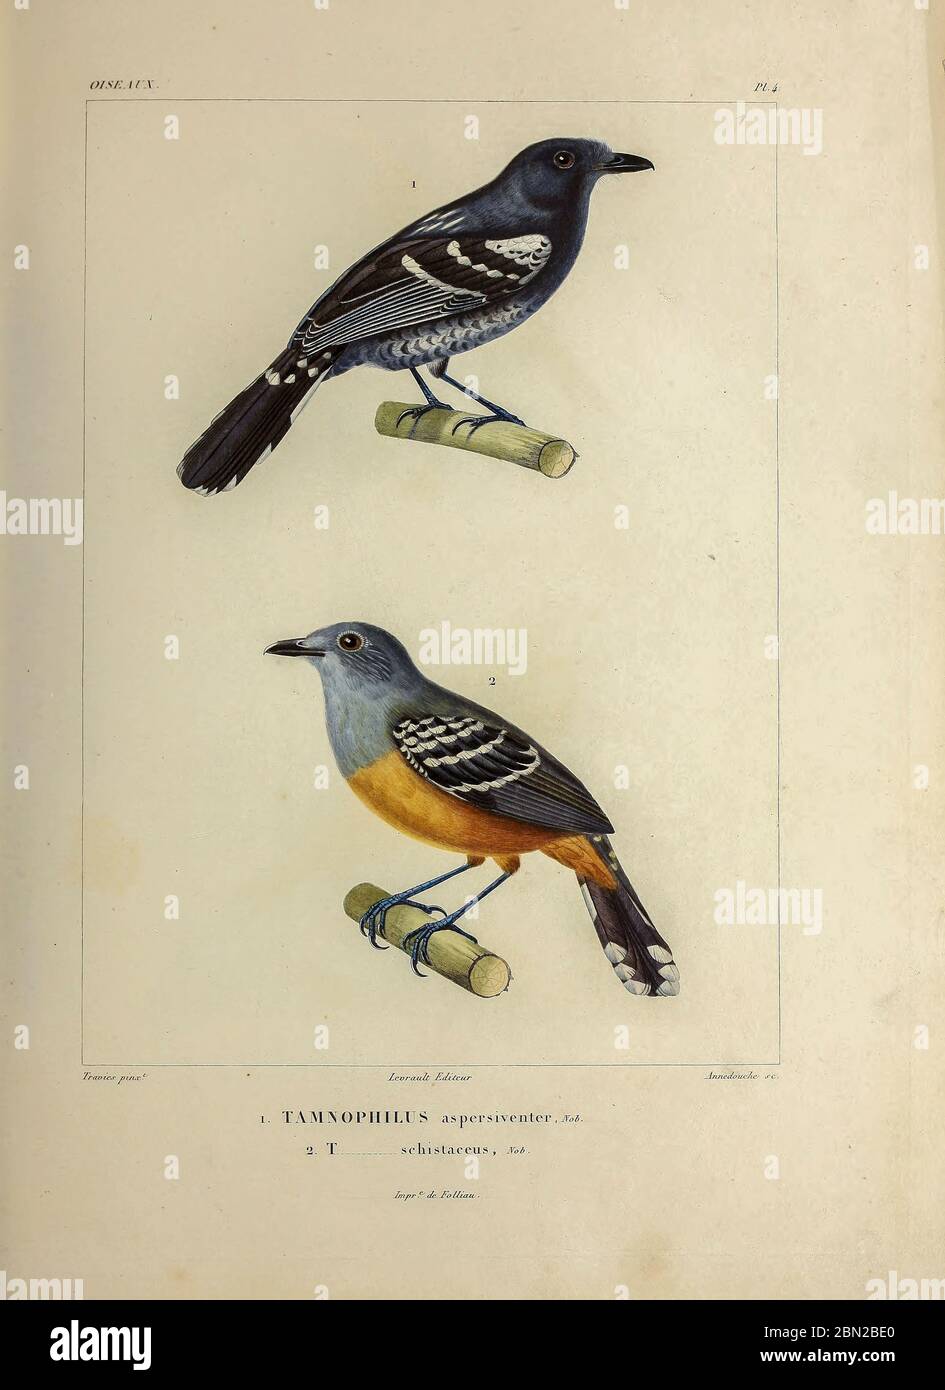 hand coloured sketch top: Variable Antshrike (Thamnophilus caerulescens aspersiventer [Here as Tamnophilus aspersiventer]) Bottom: Plain-winged Antshrike (Thamnophilus schistaceus [Here as Tamnophilus schistaceus]) From the book 'Voyage dans l'Amérique Méridionale' [Journey to South America: (Brazil, the eastern republic of Uruguay, the Argentine Republic, Patagonia, the republic of Chile, the republic of Bolivia, the republic of Peru), executed during the years 1826 - 1833] 4th volume Part 3 By: Orbigny, Alcide Dessalines d', d'Orbigny, 1802-1857; Montagne, Jean François Camille, 1784-1866; Stock Photo